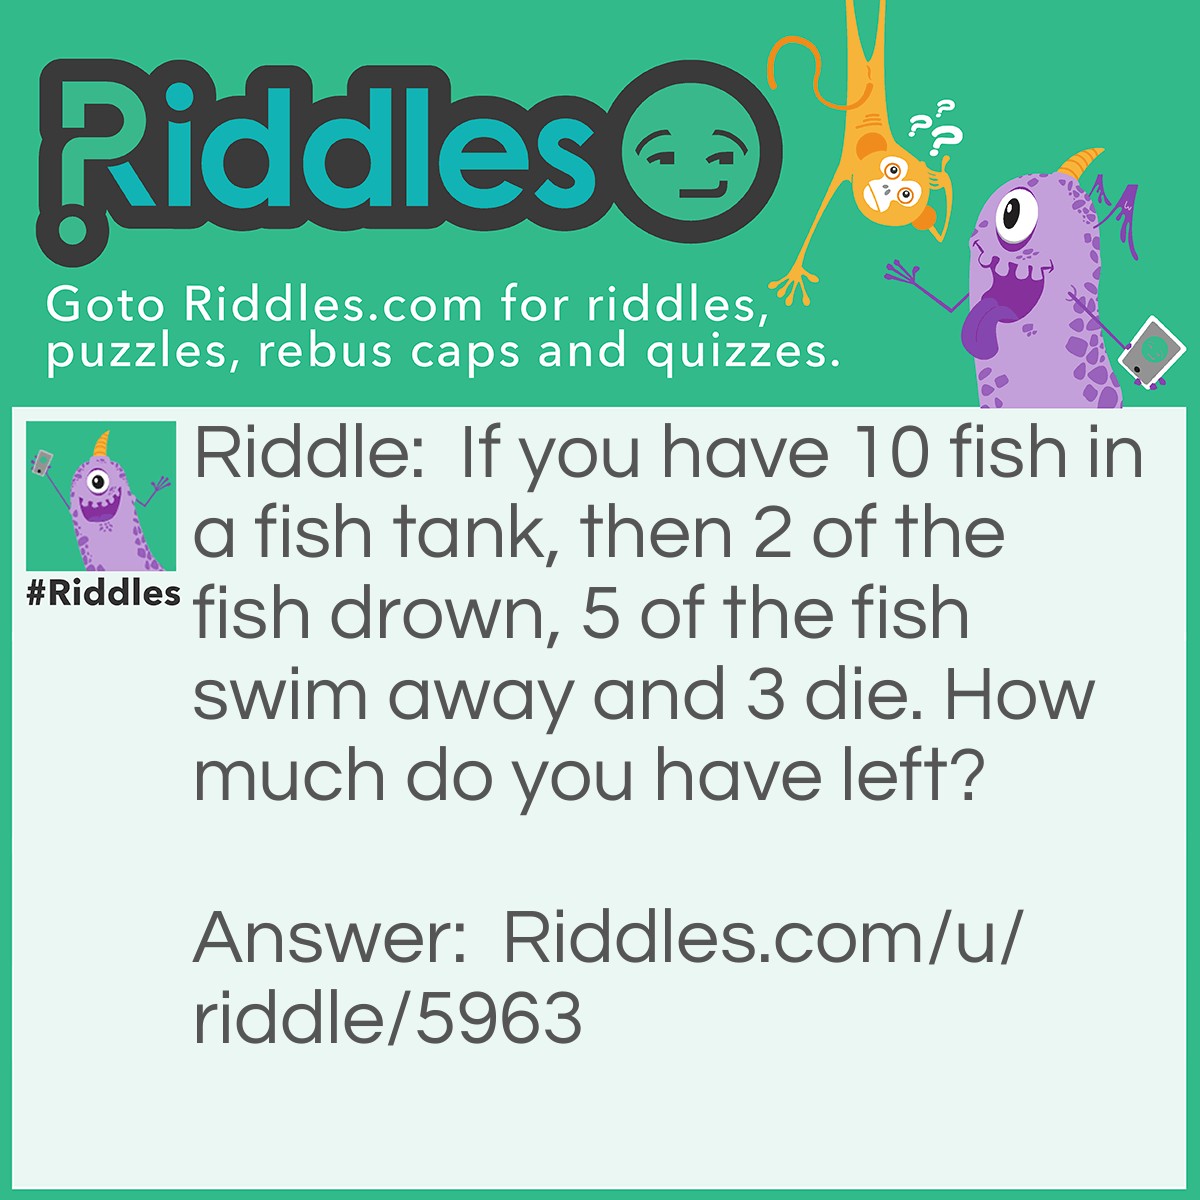 Riddle: If you have 10 fish in a fish tank, then 2 of the fish drown, 5 of the fish swim away and 3 die. How much do you have left? Answer: You have 7 fish left.